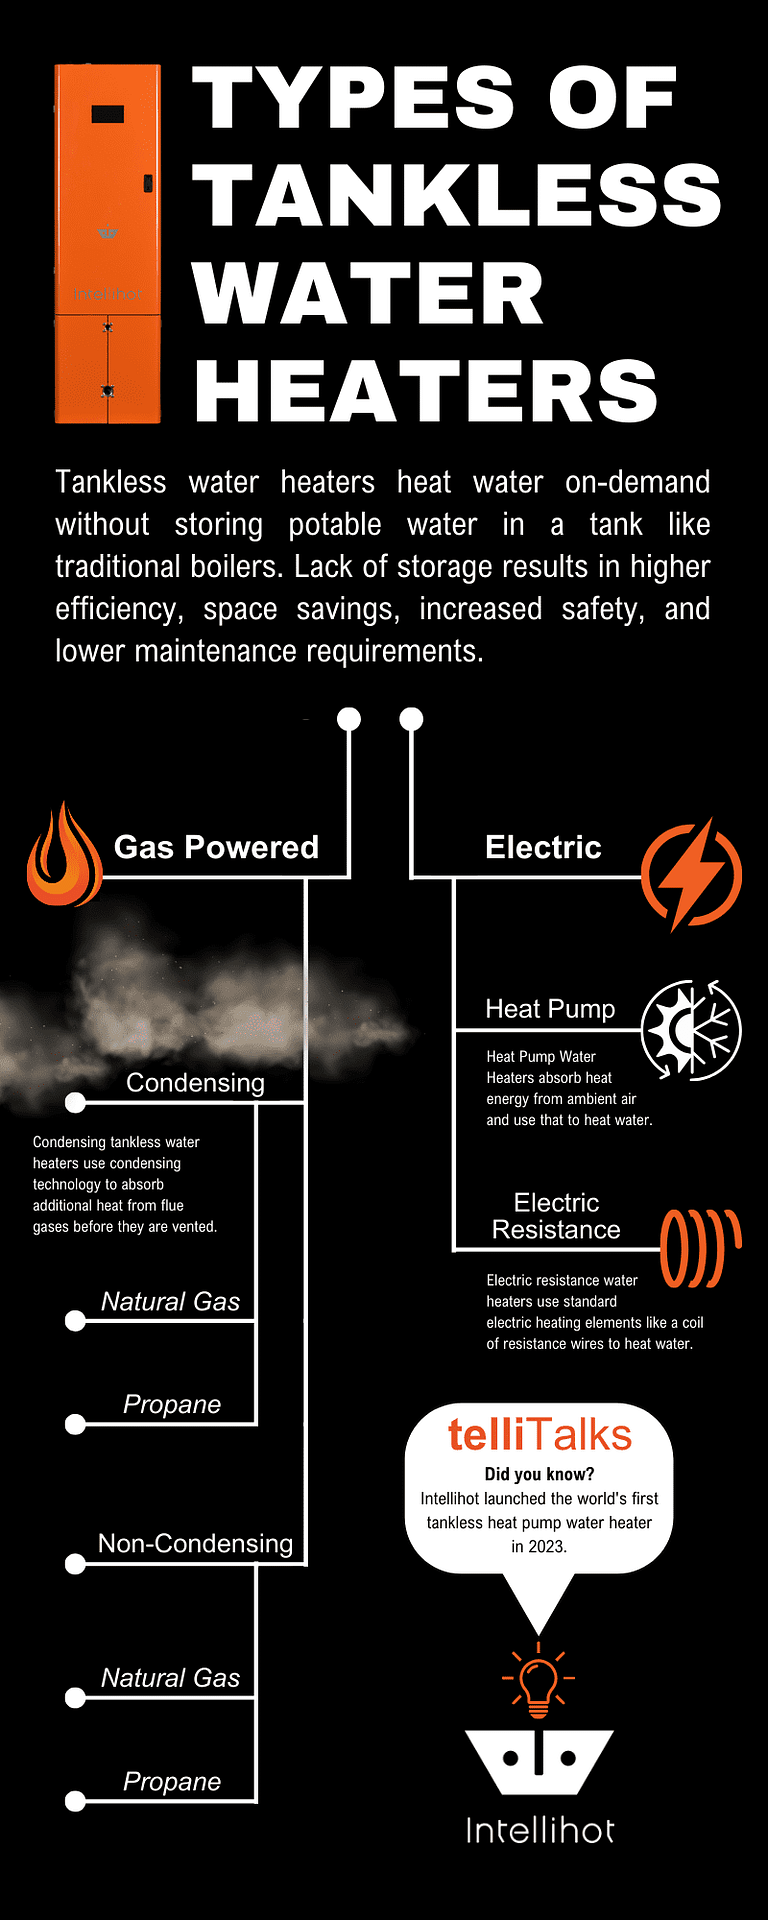 https://ml58lemqnh9a.i.optimole.com/w:auto/h:auto/q:90/f:best/https://www.intellihot.com/wp-content/uploads/2023/09/Types-of-Tankless-Water-Heaters-Infographic-min.png